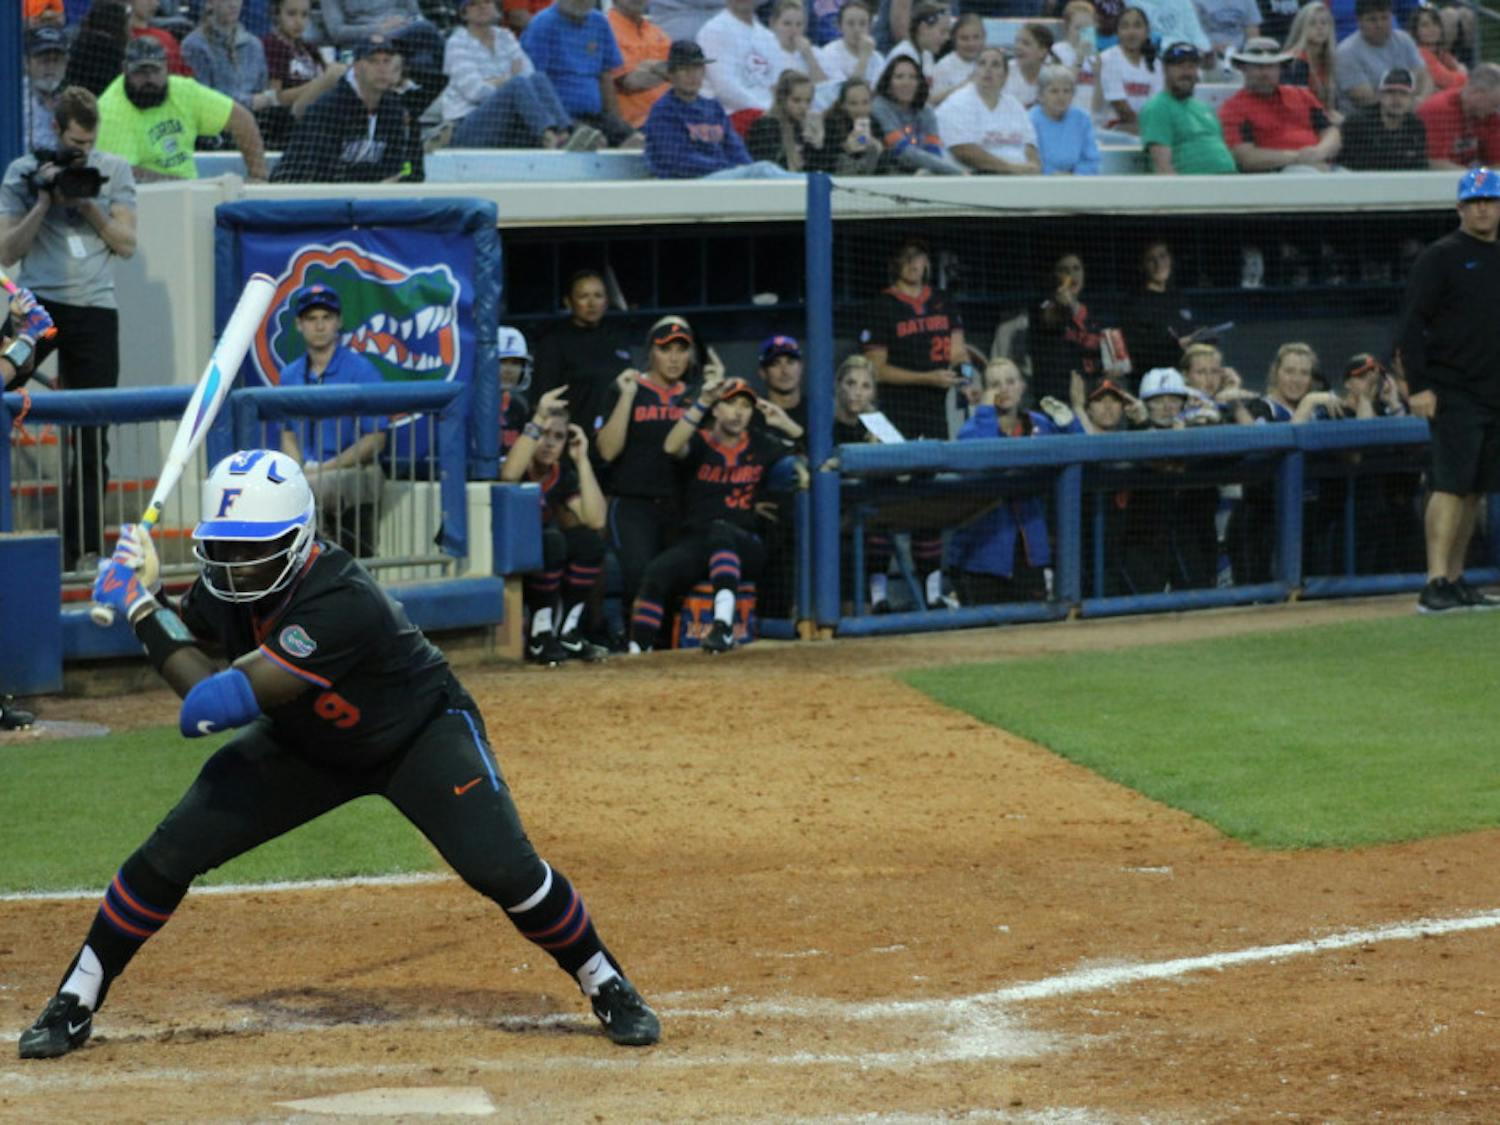 Jaimie Hoover had four runs in four at-bats in the Gators' Saturday doubleheader. Florida topped Illinois State 10-2 and defeated Syracuse 8-0.